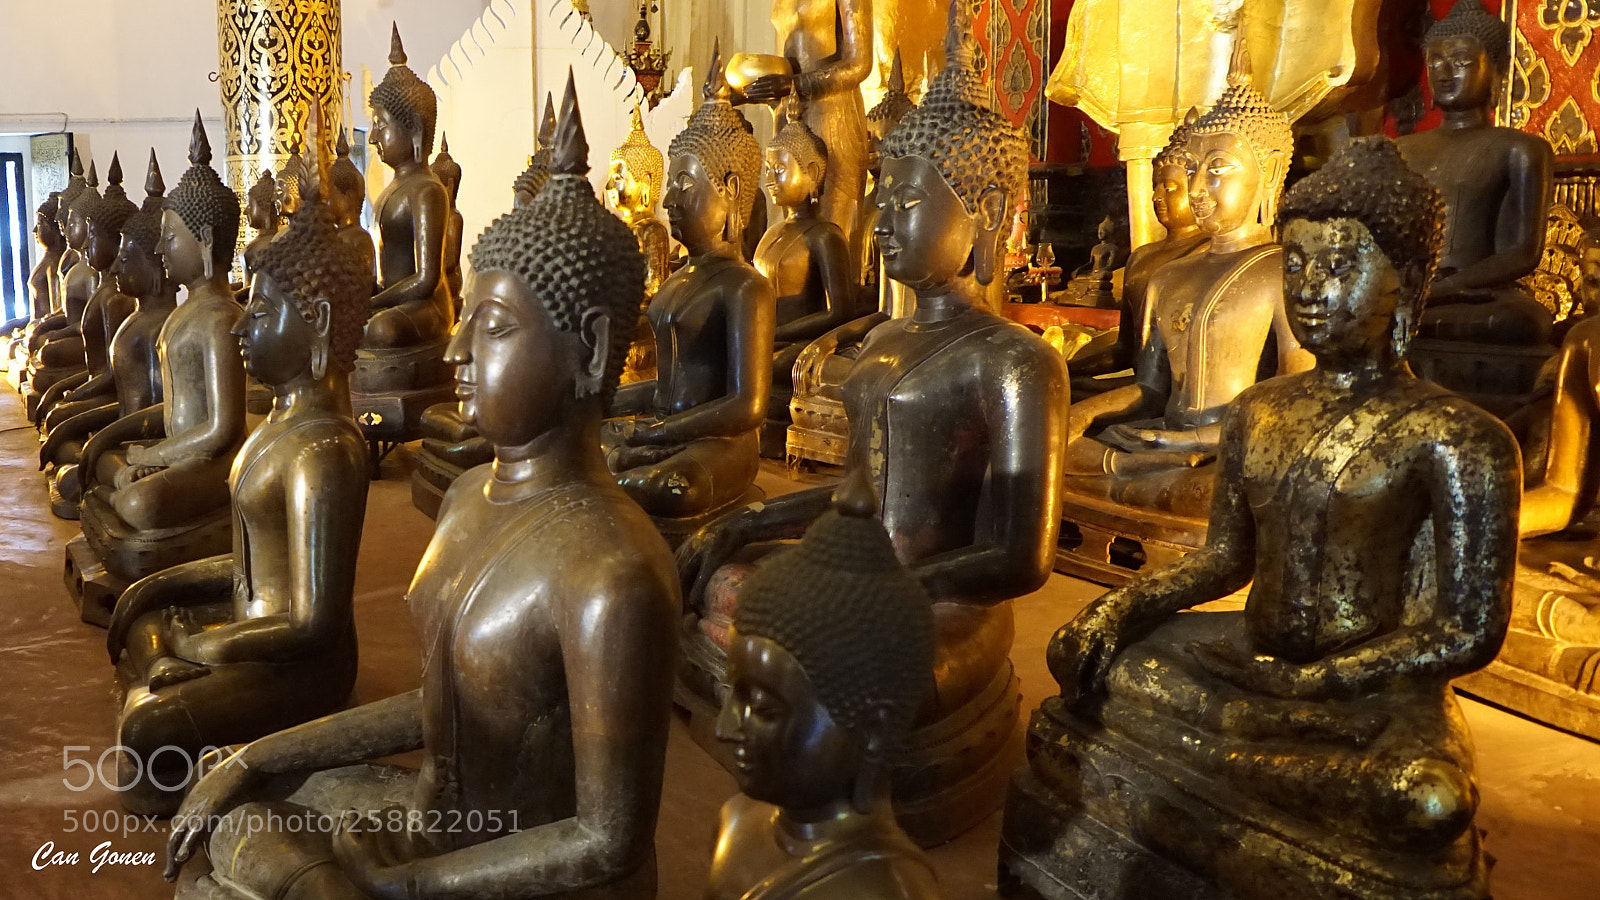 Sony a6000 sample photo. Buddha sculptures in the photography